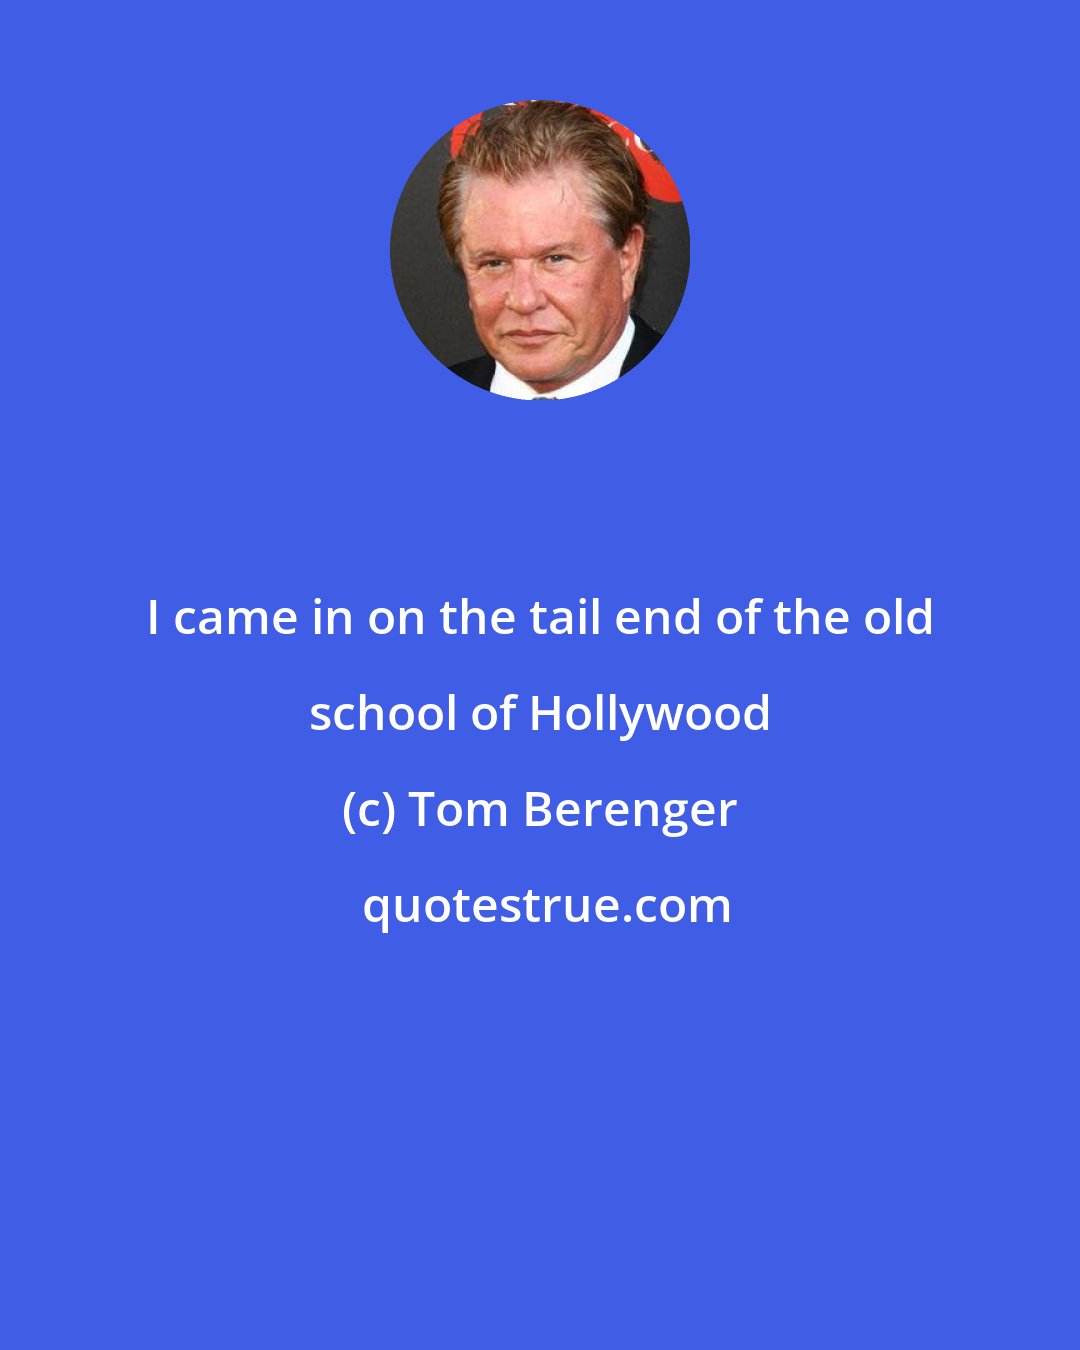 Tom Berenger: I came in on the tail end of the old school of Hollywood